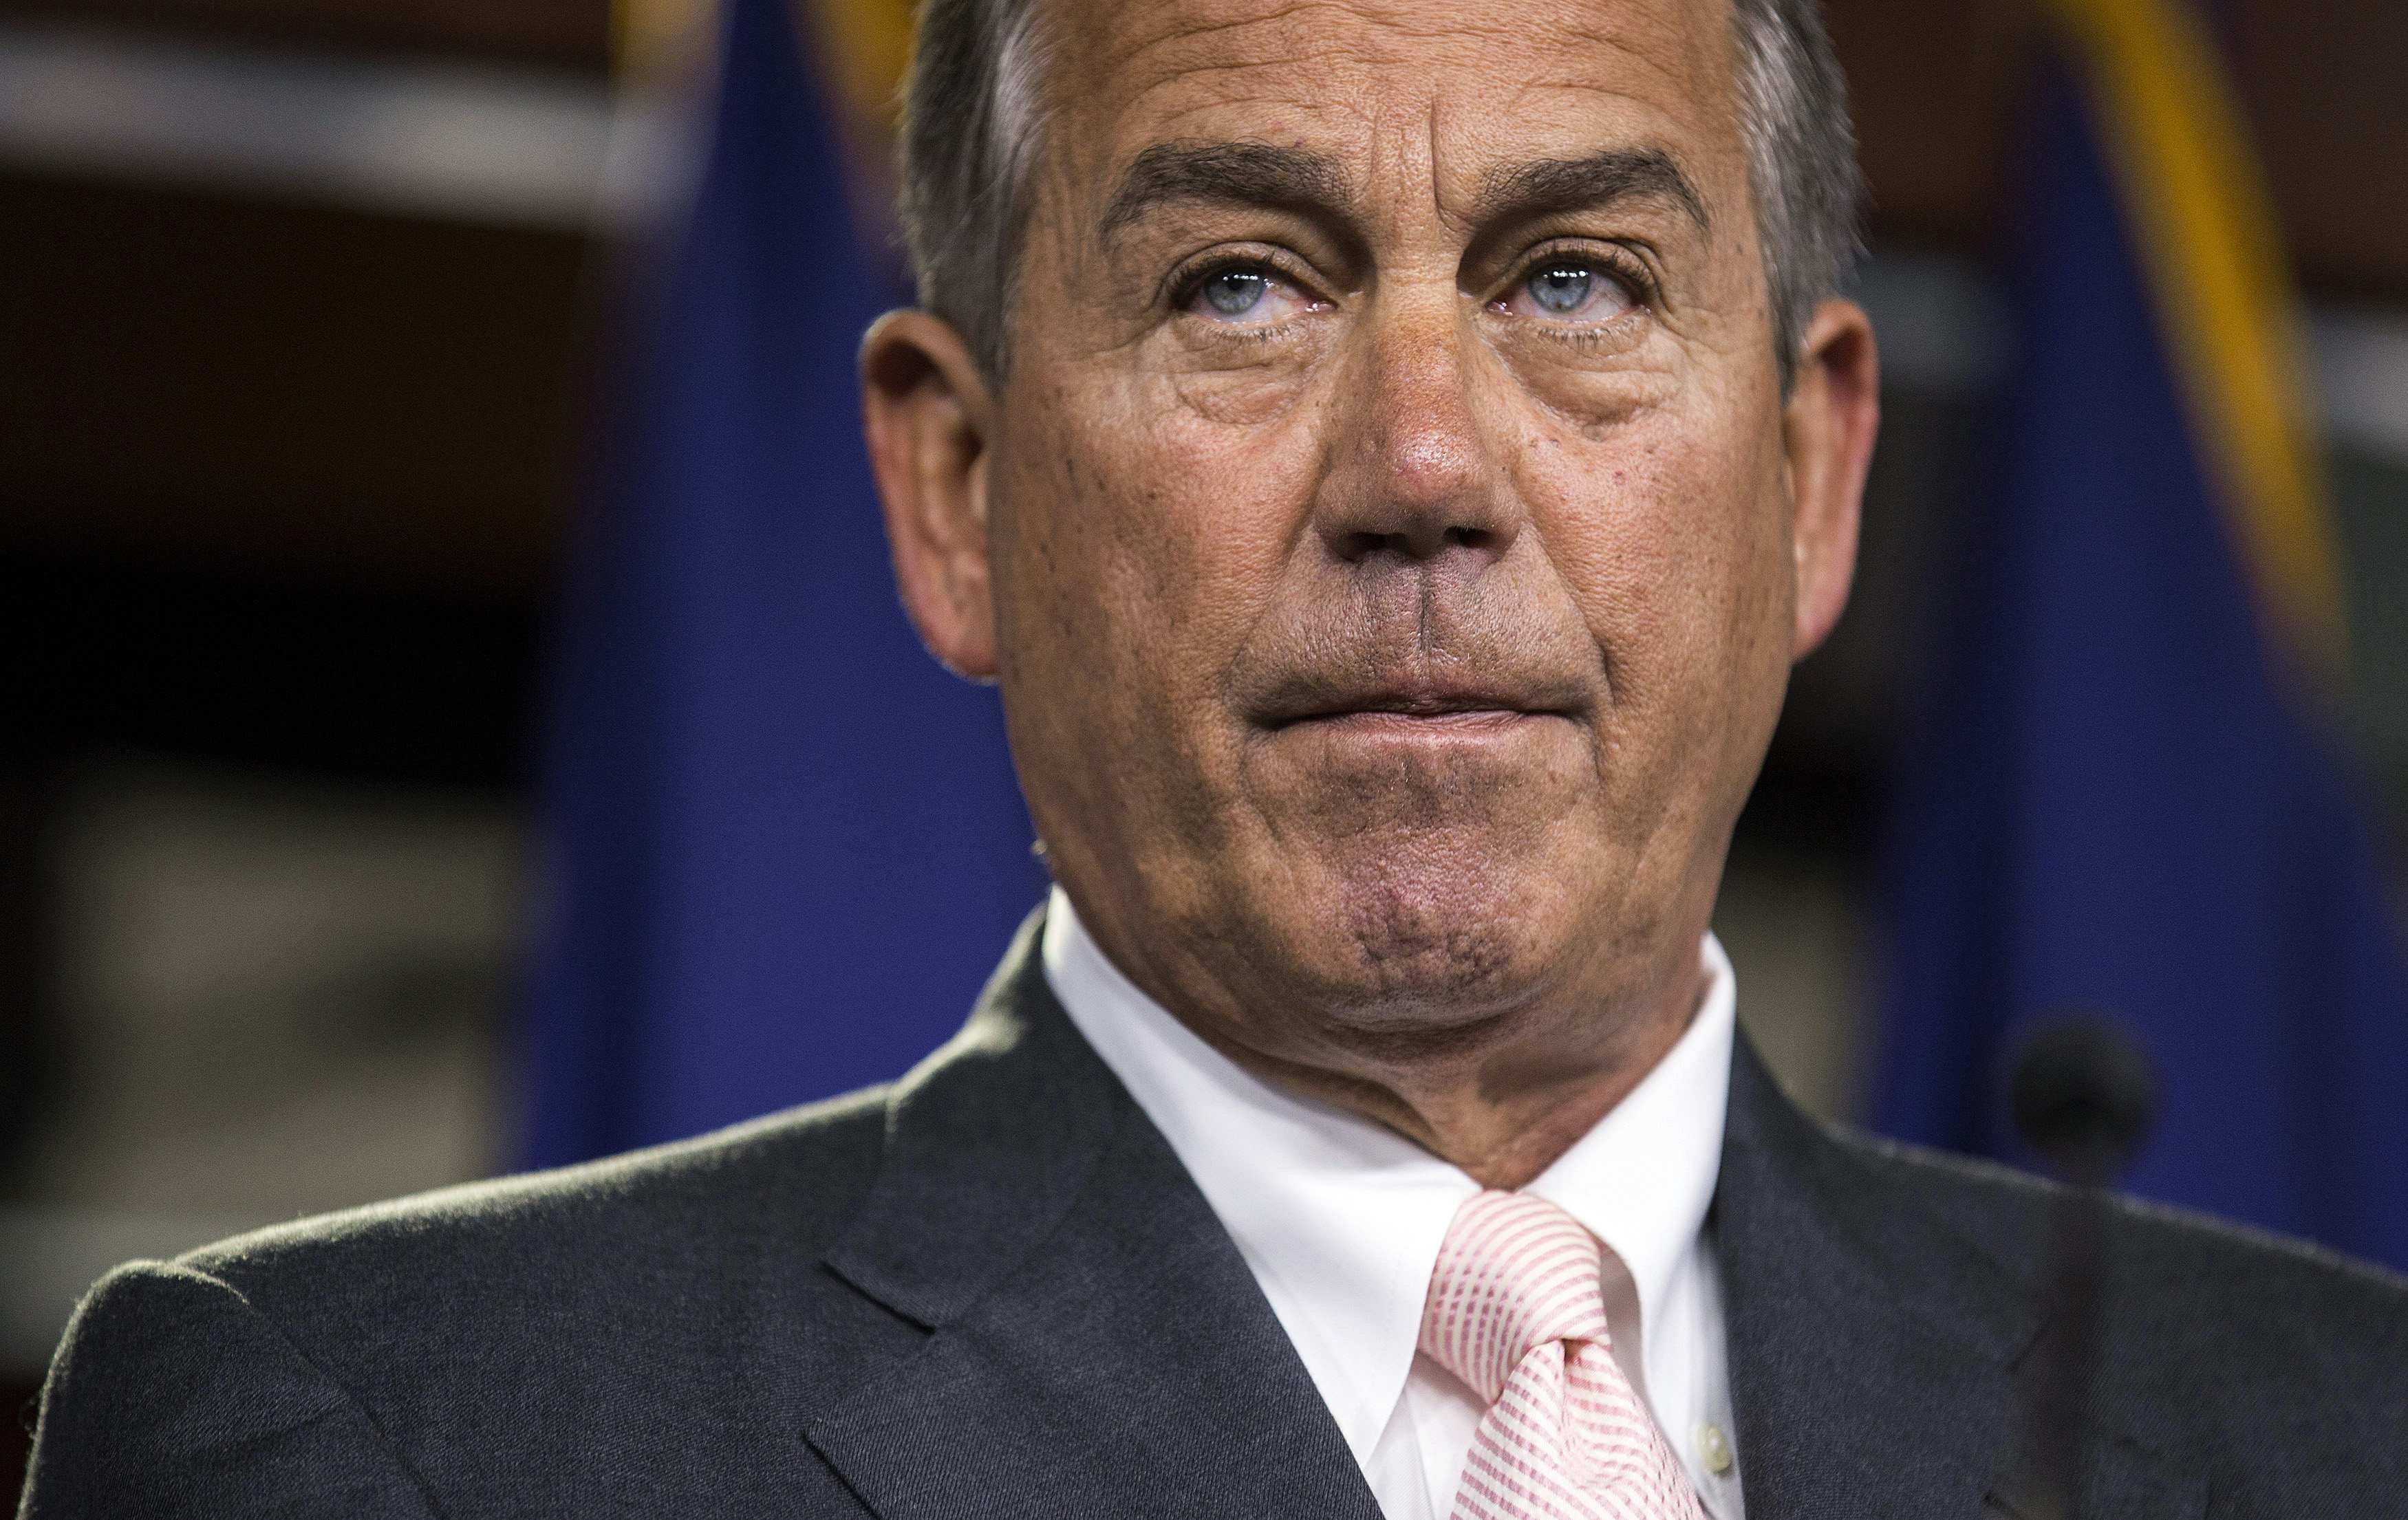 Speaker of the House John Boehner (R-OH) speaks to the media on Capitol Hill in Washington, July 10, 2014. (Joshua Roberts—Reuters)